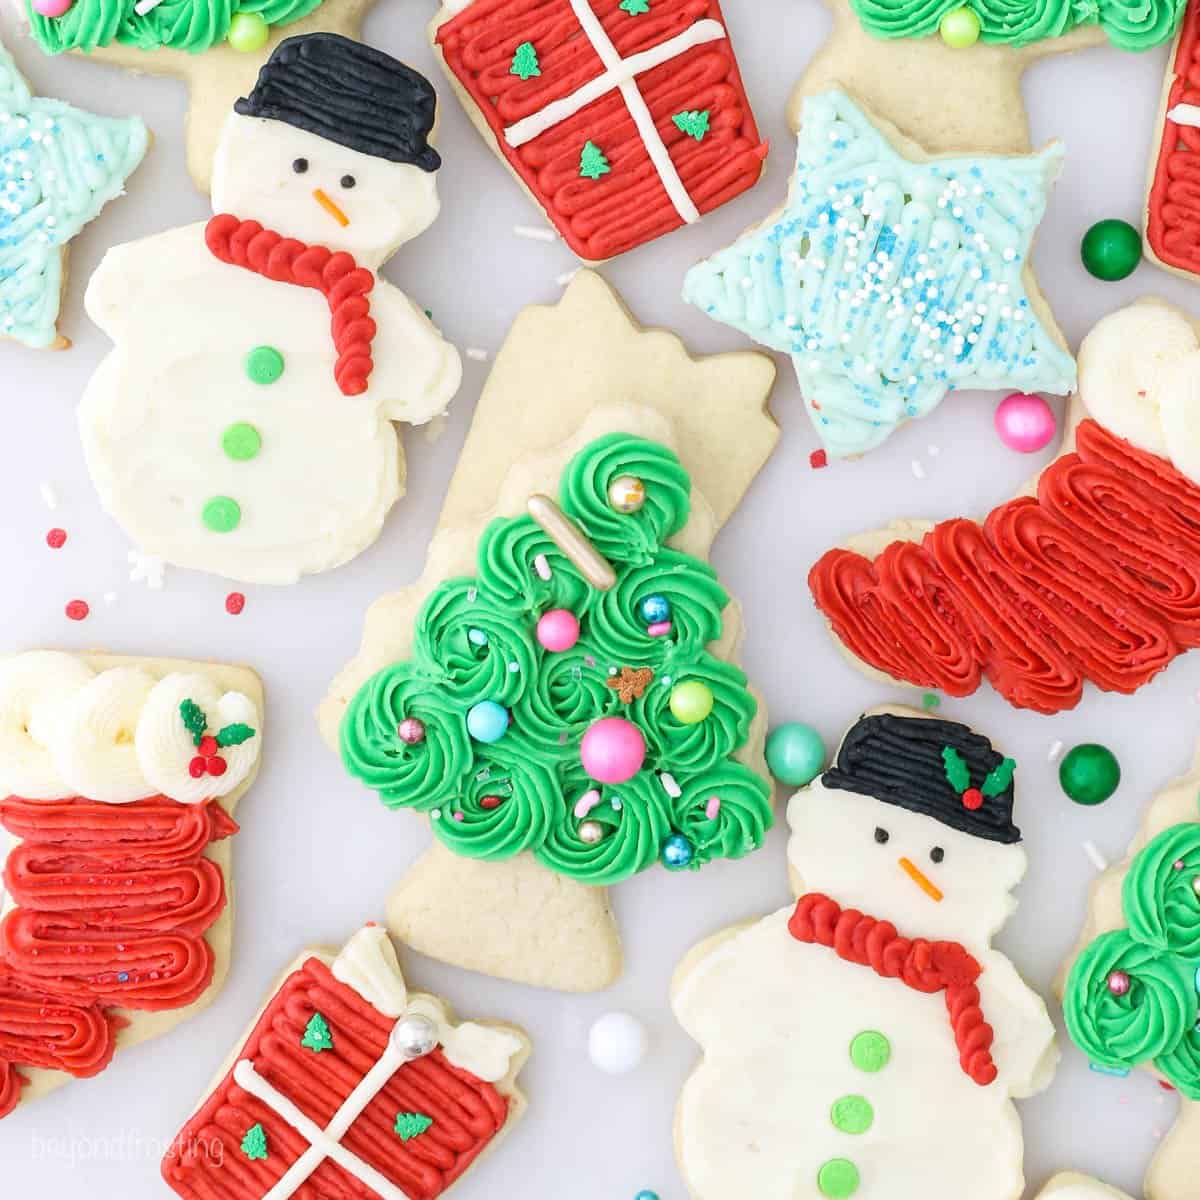 How to Decorate Sugar Cookies l Step-by-Step Instructions